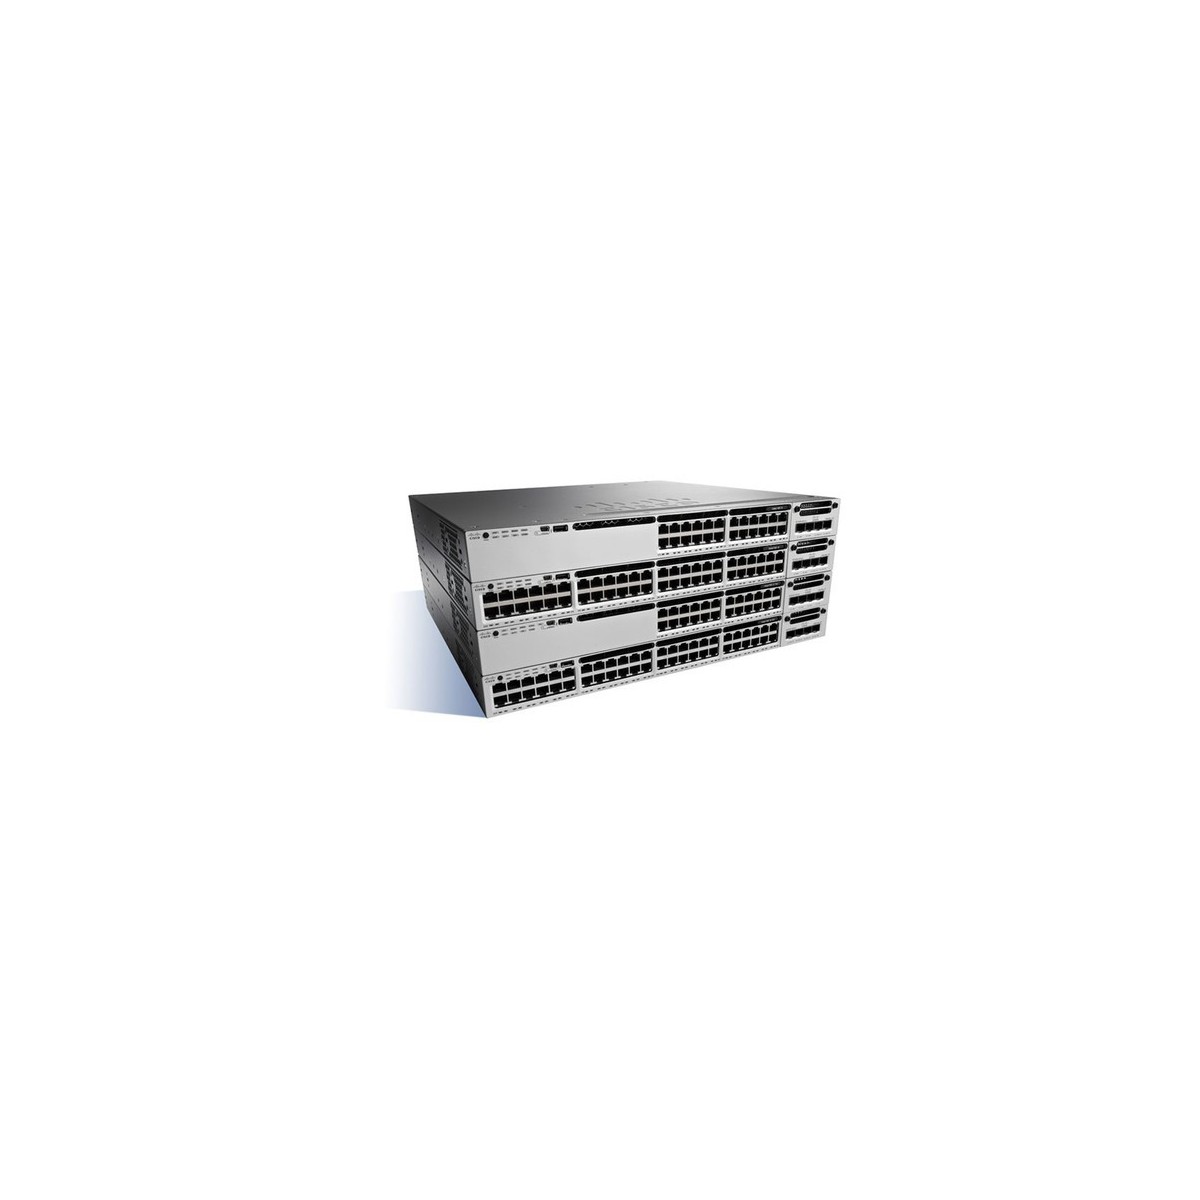 Cisco Catalyst WS-C3850-24P-S 24 Ports Manageable Layer 3 Switch - 3 Layer Supported - Modular - Twisted Pair - PoE Ports - 1U H